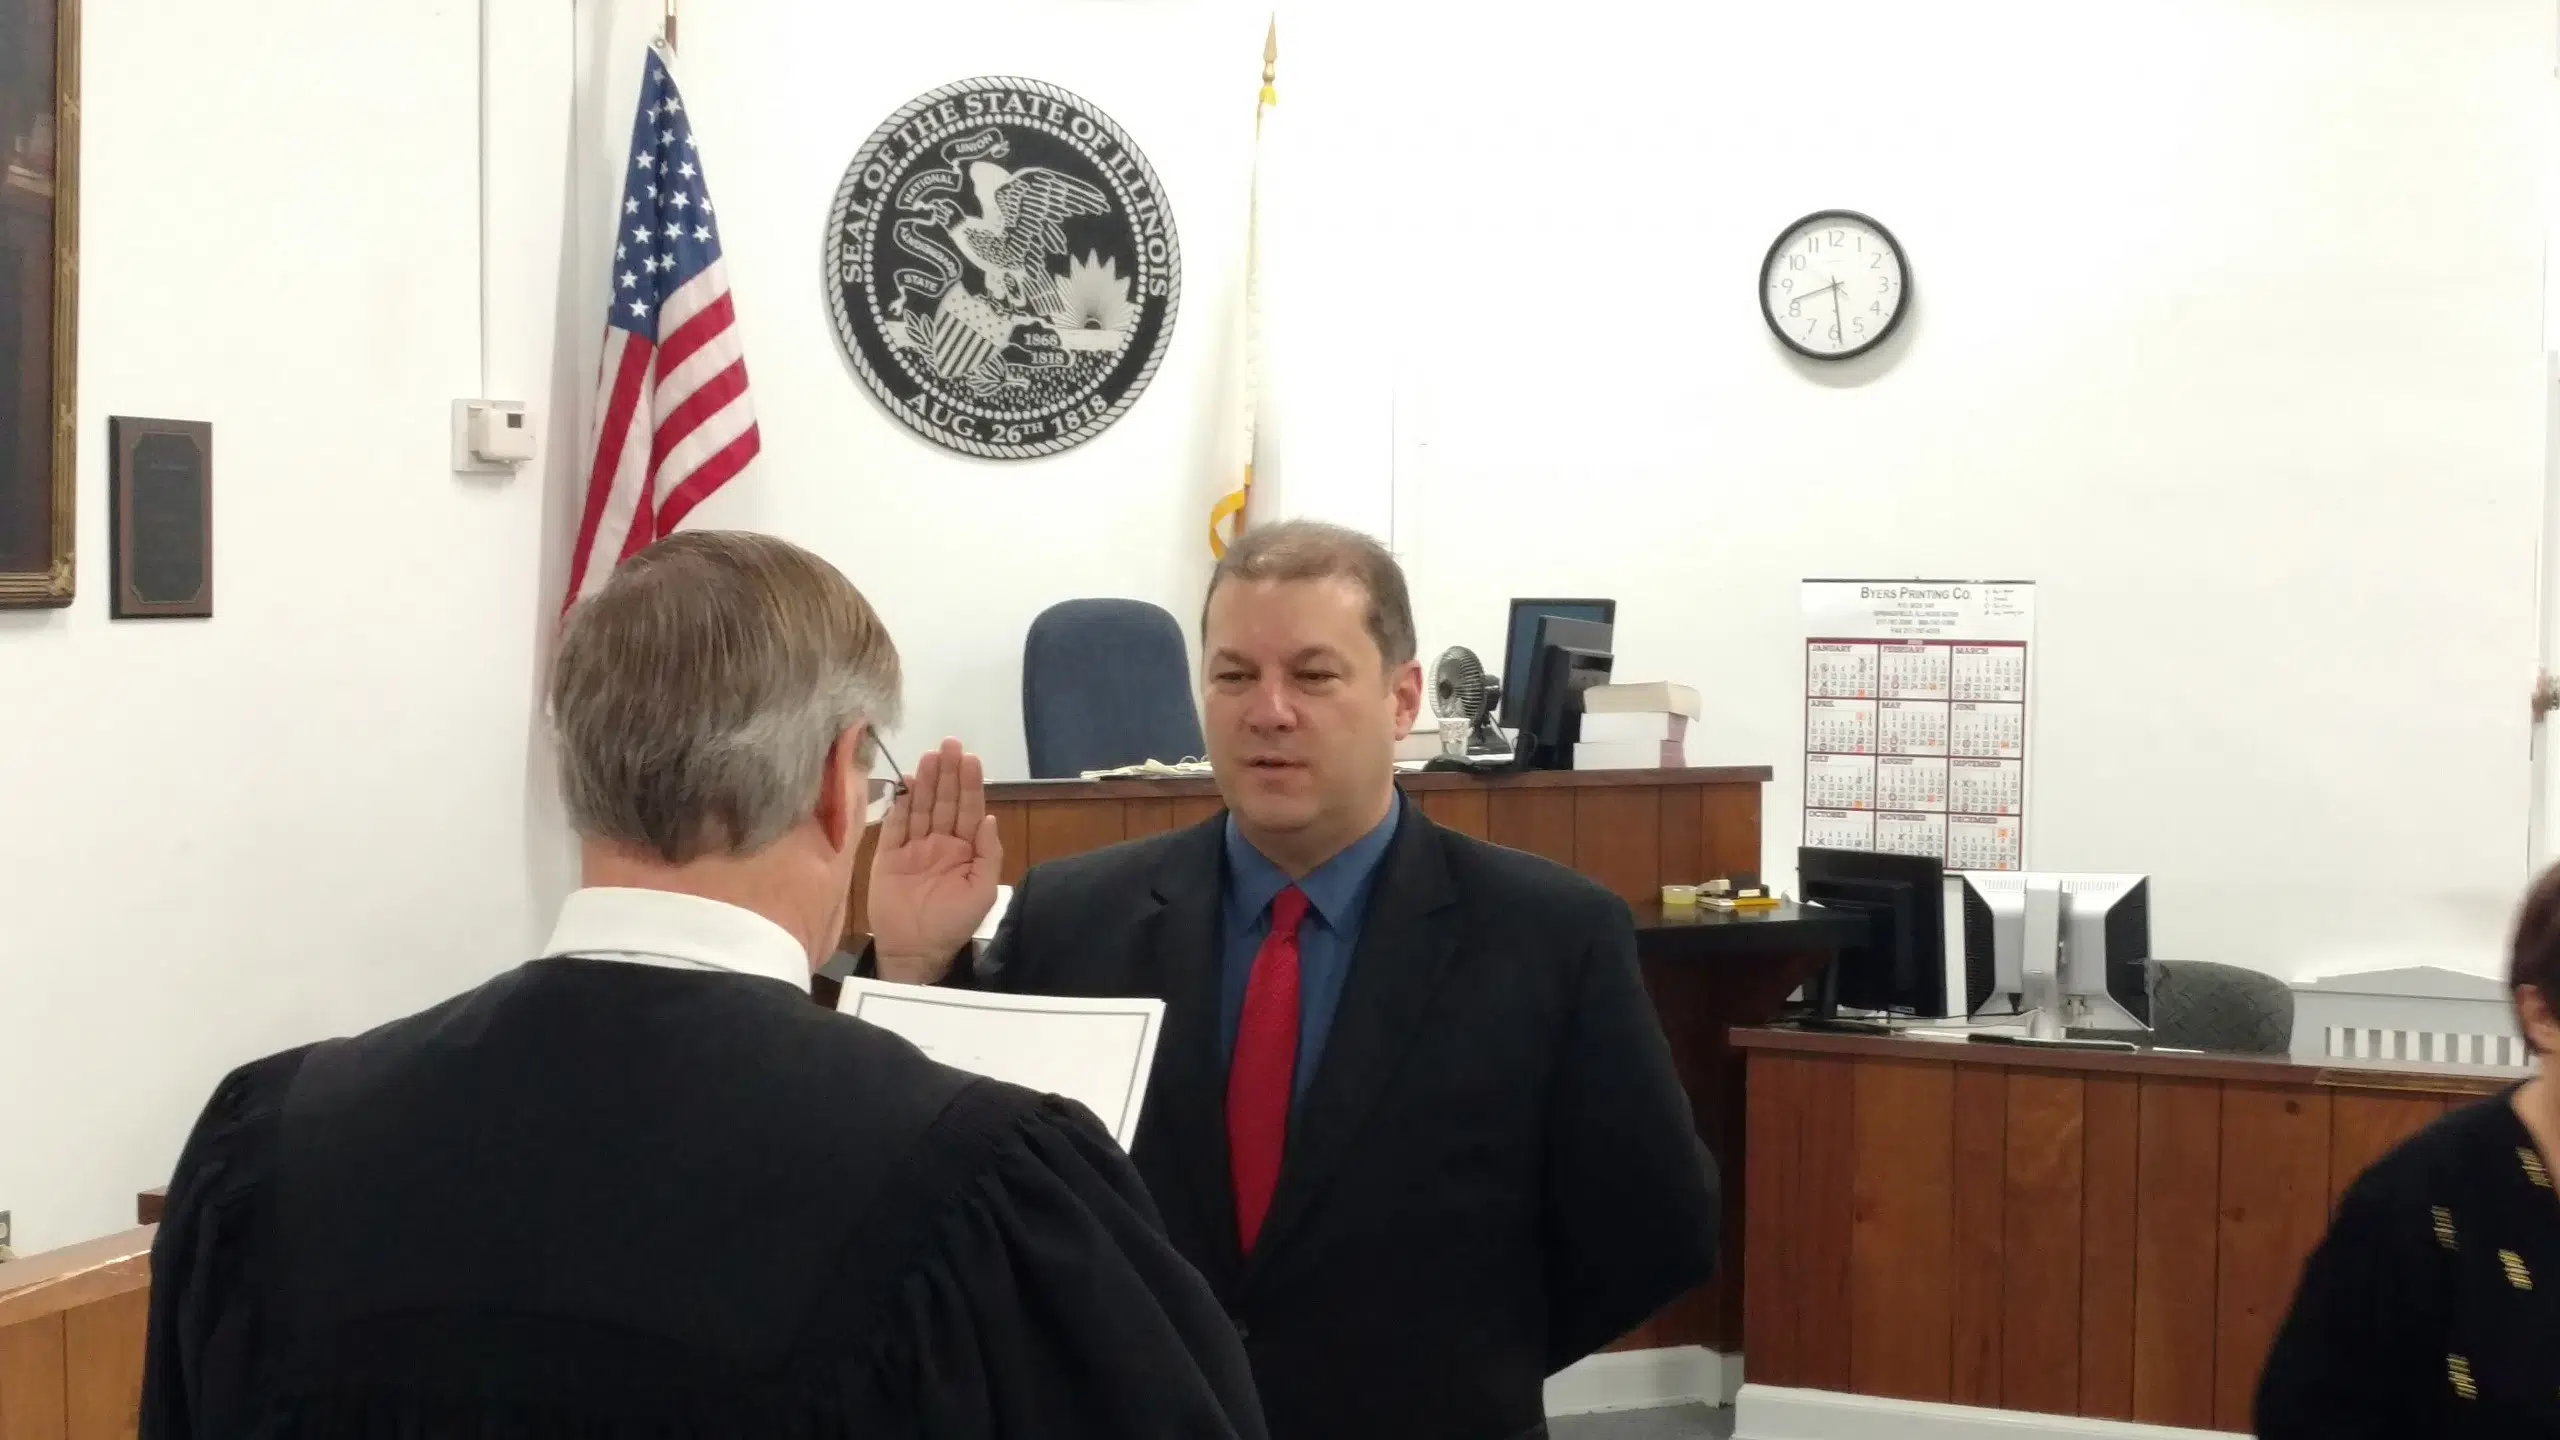 Joshua Morrison takes oath to serve 2nd term as Fayette County State's Attorney 